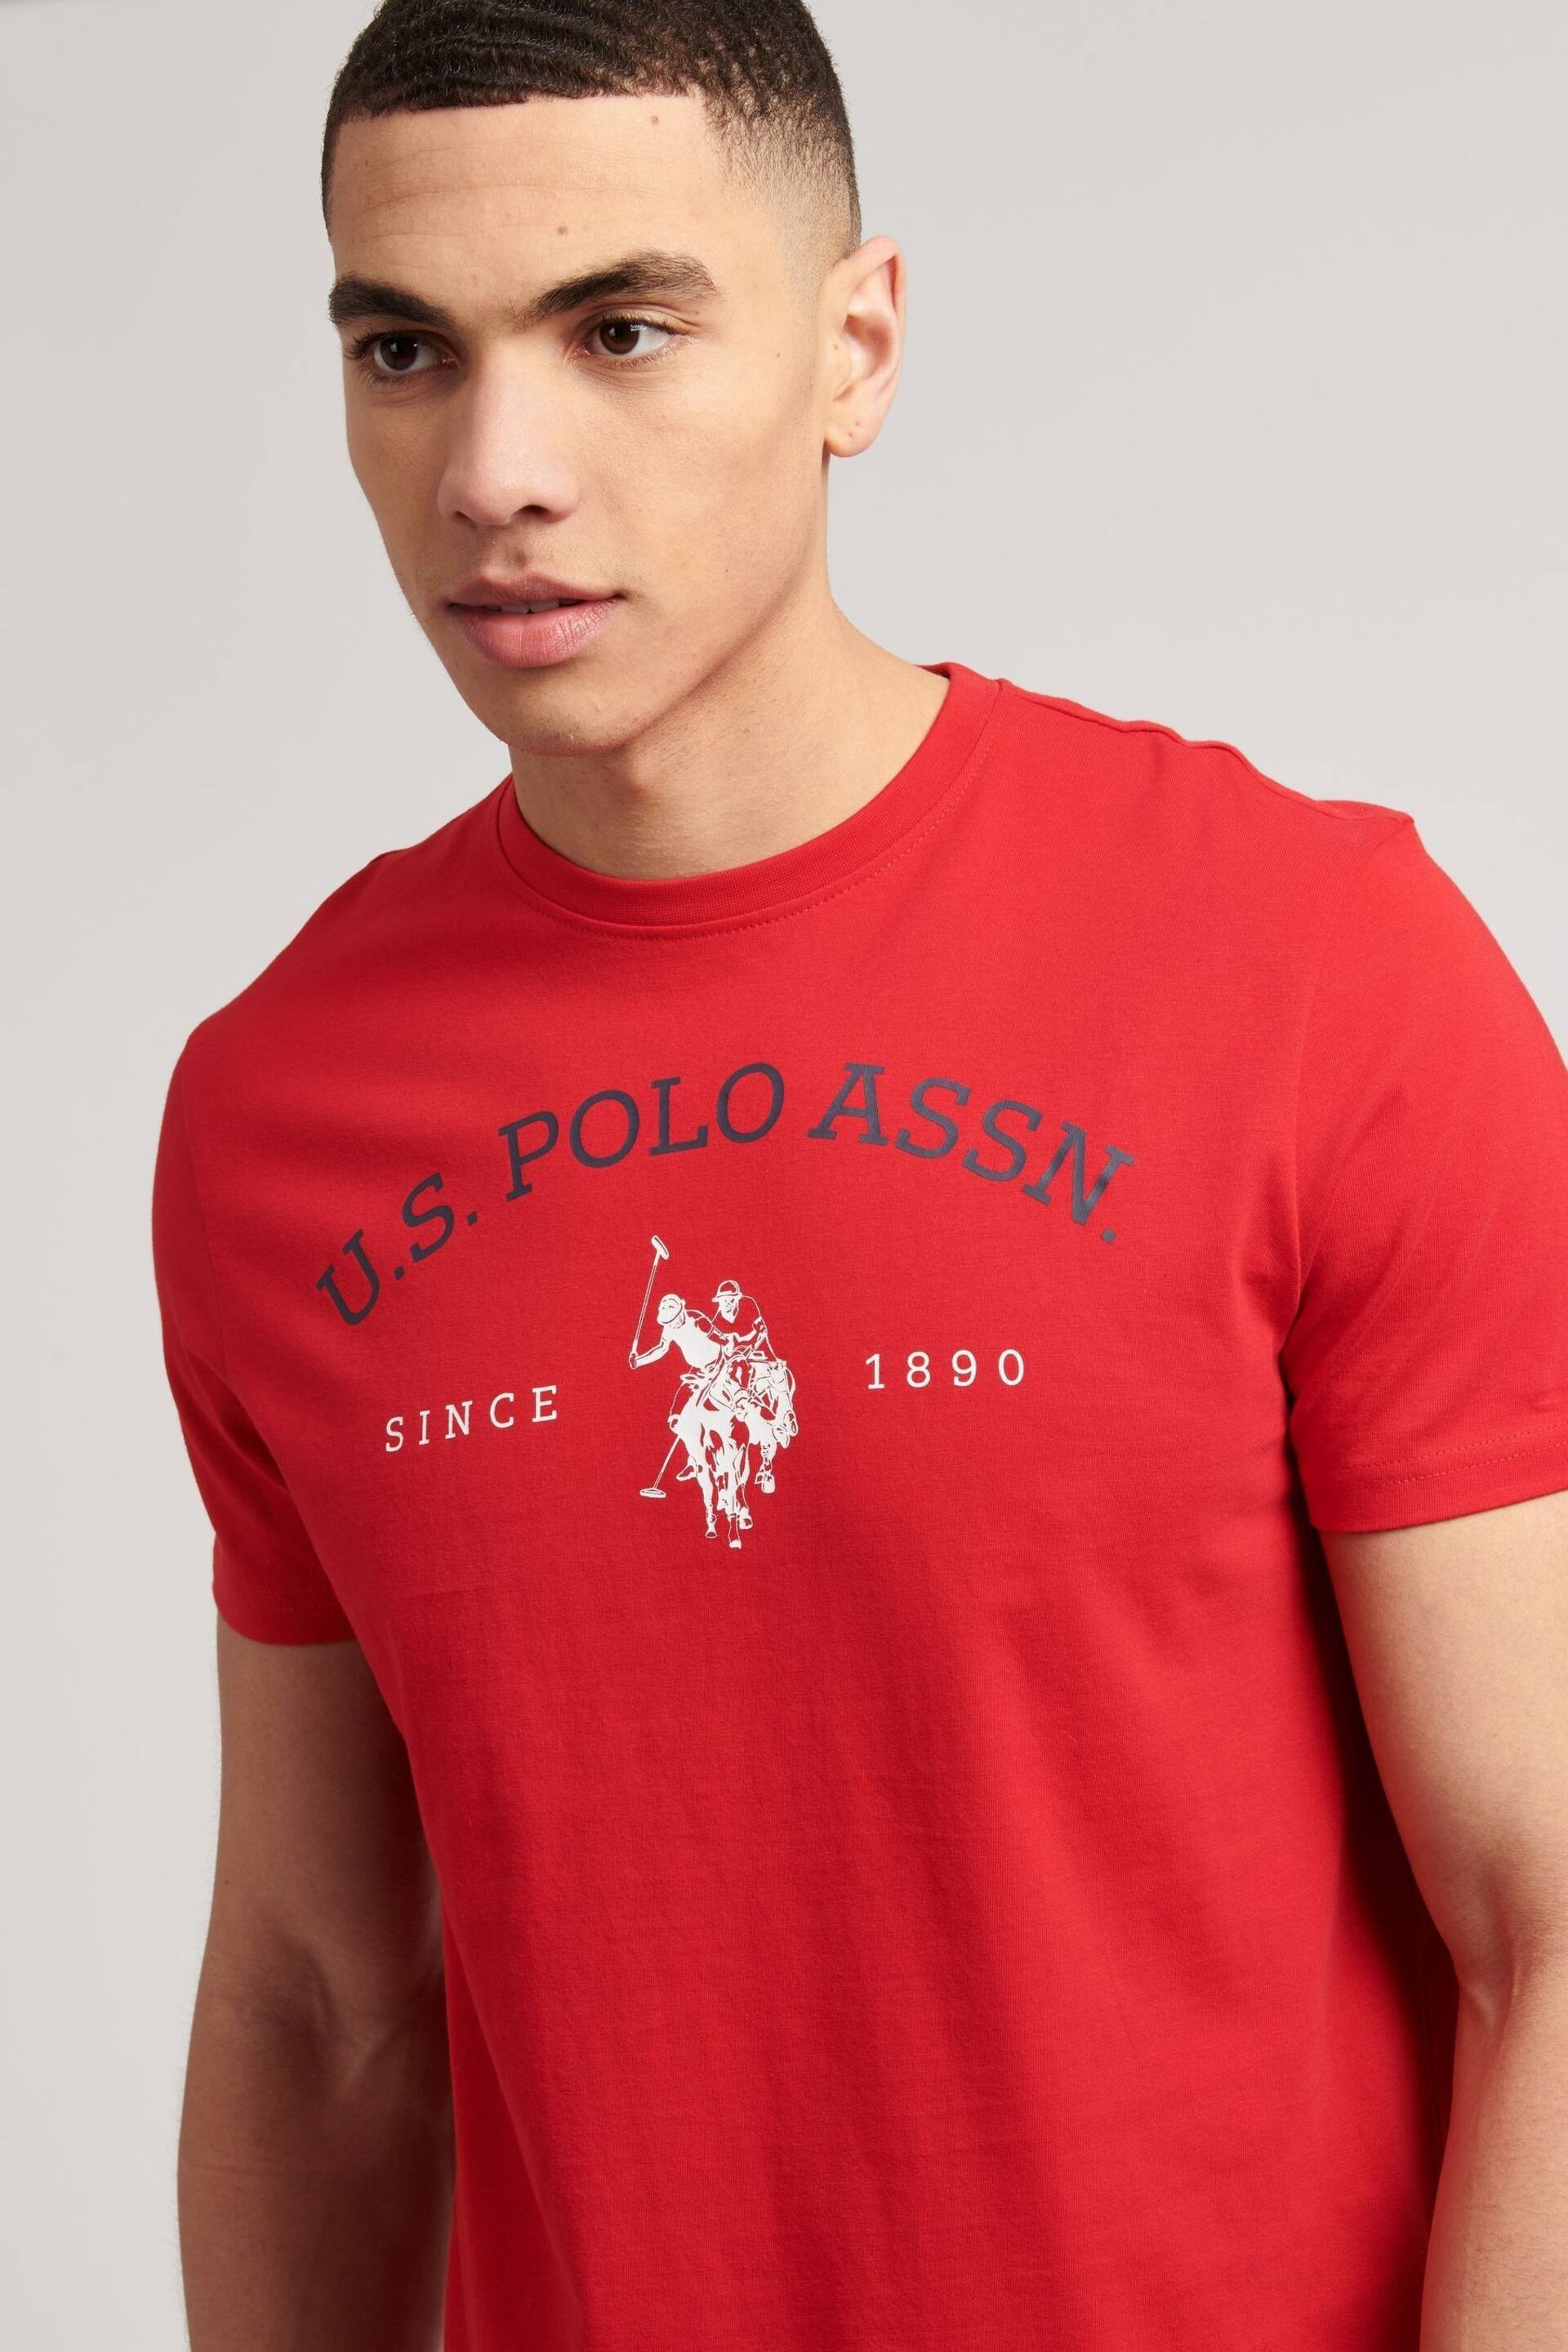 U.S. Polo Assn. Graphic T-Shirt - Image 3 of 5